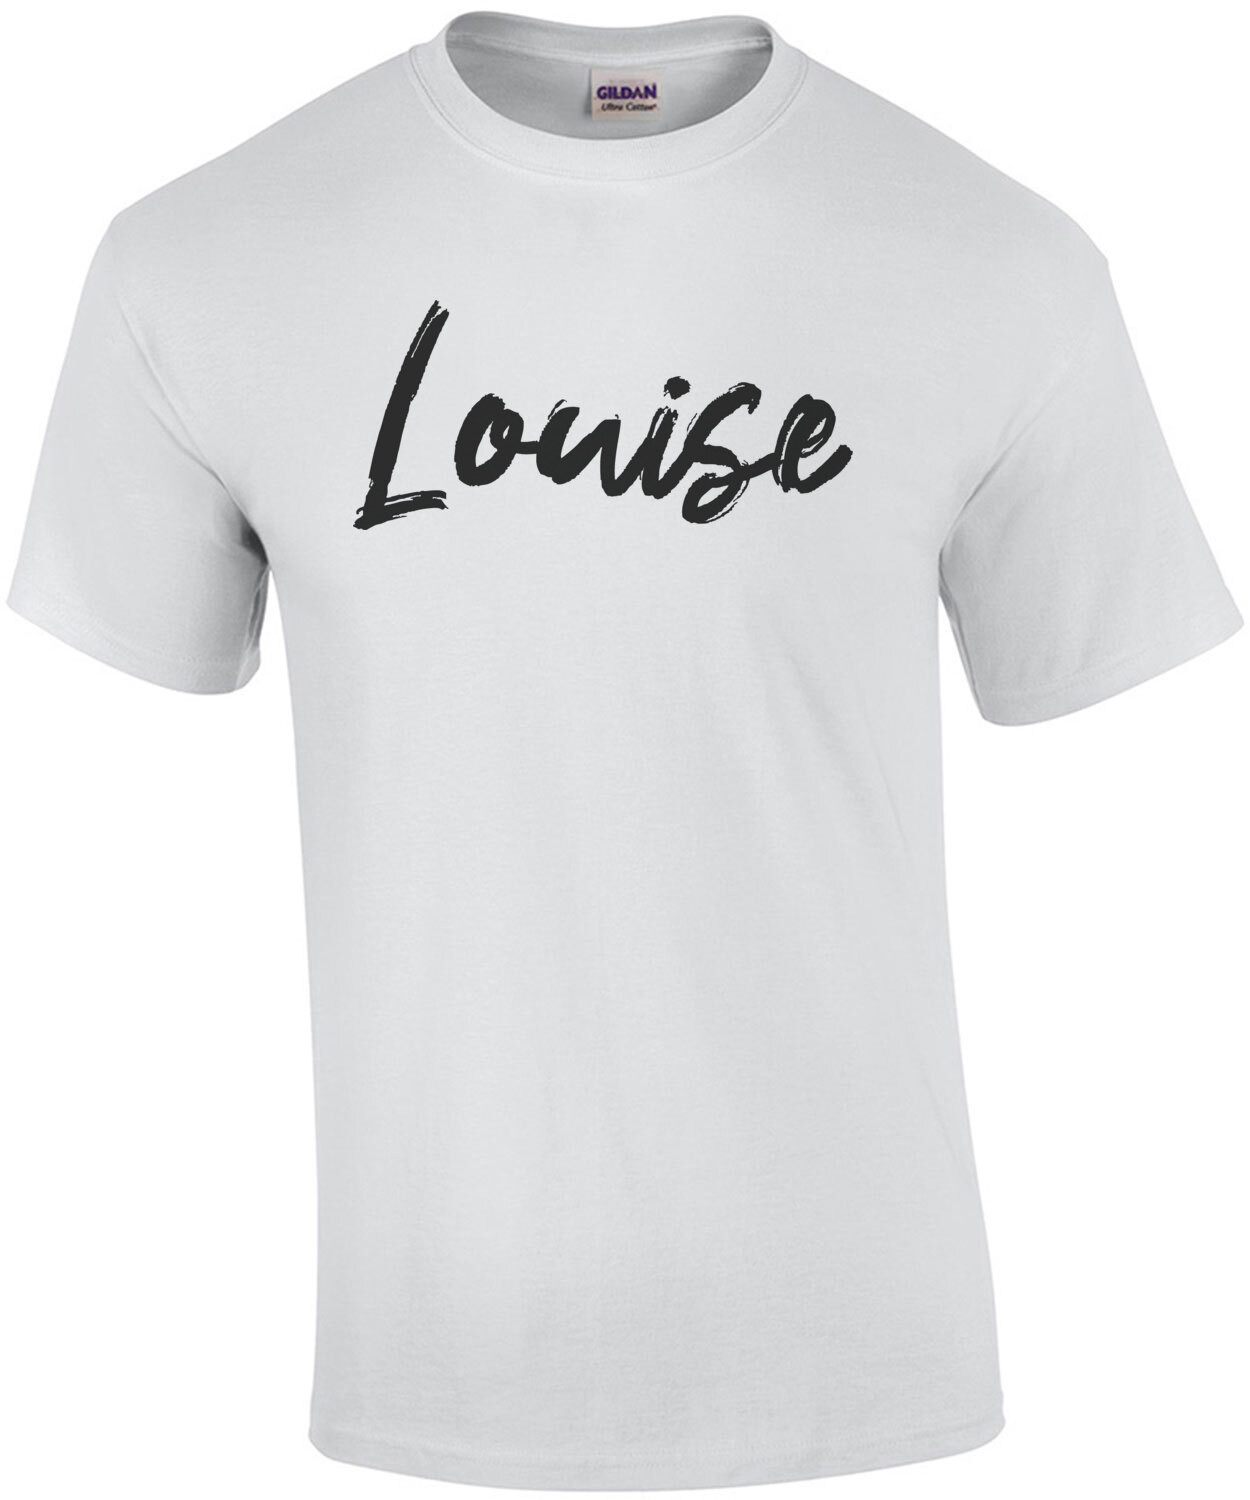 Louise - Thelma and Louise - 90's T-Shirt